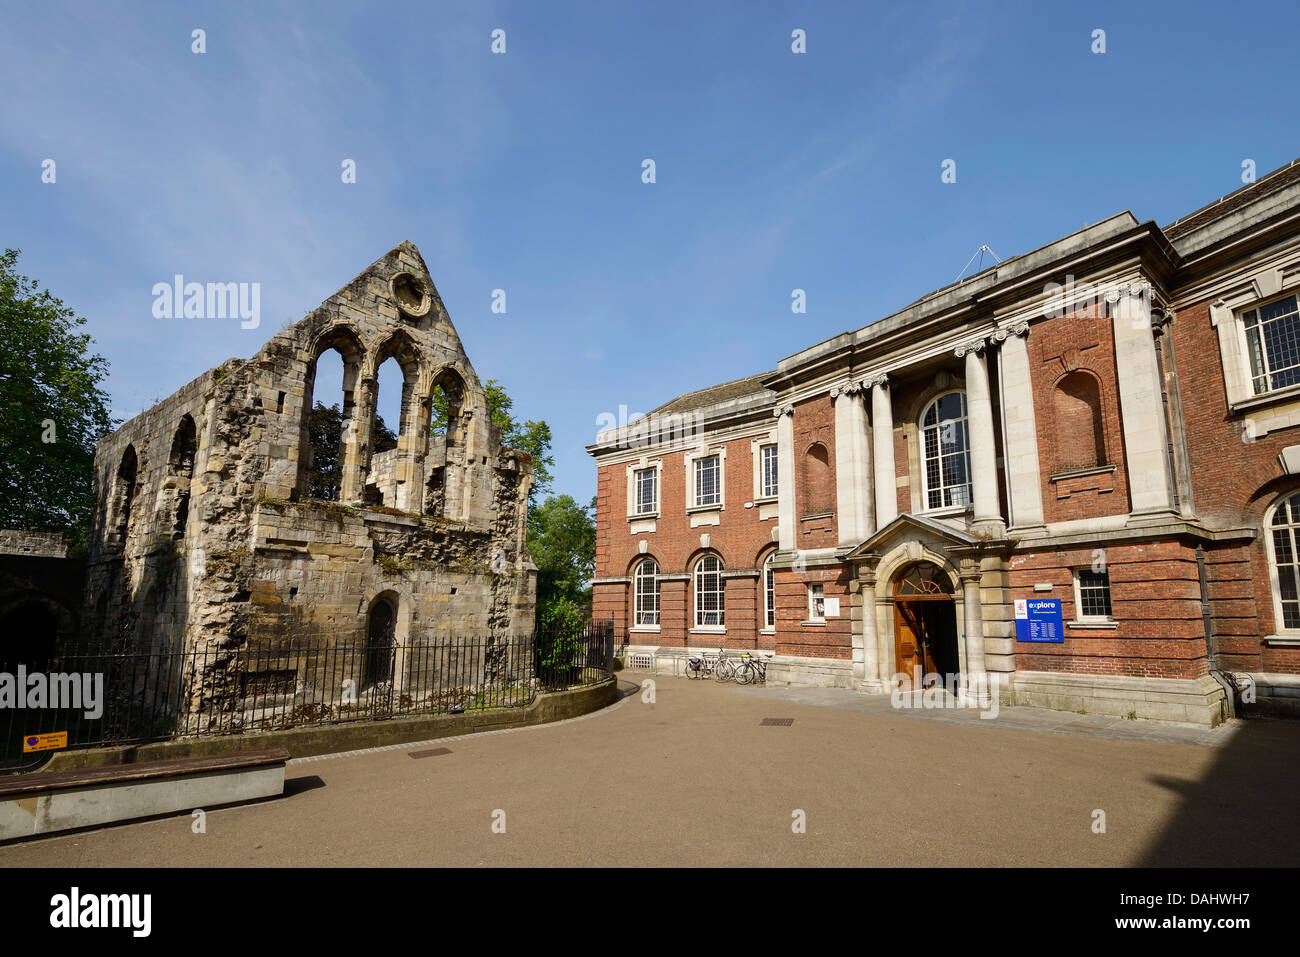 St Leonards Hospital ruin and the entrance to the Explore York Library Learning Centre in York city centre UK Stock Photo